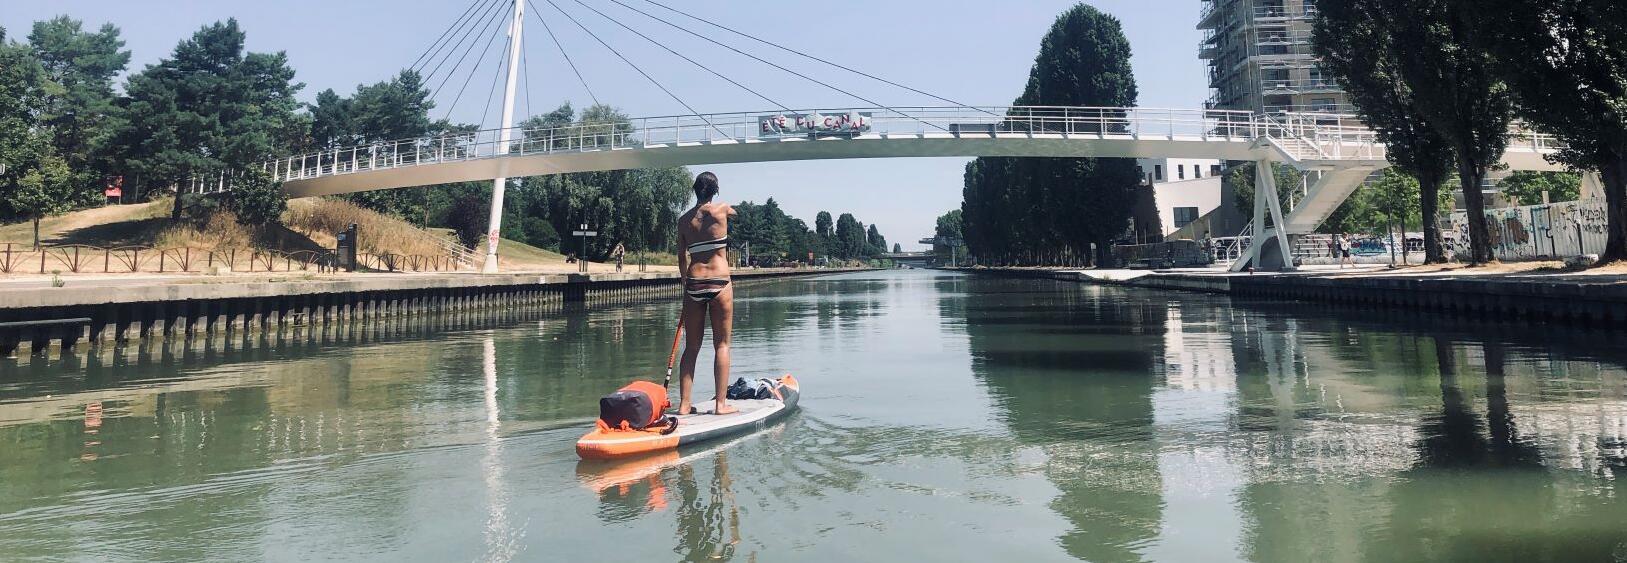 stand up paddle ourcq marne